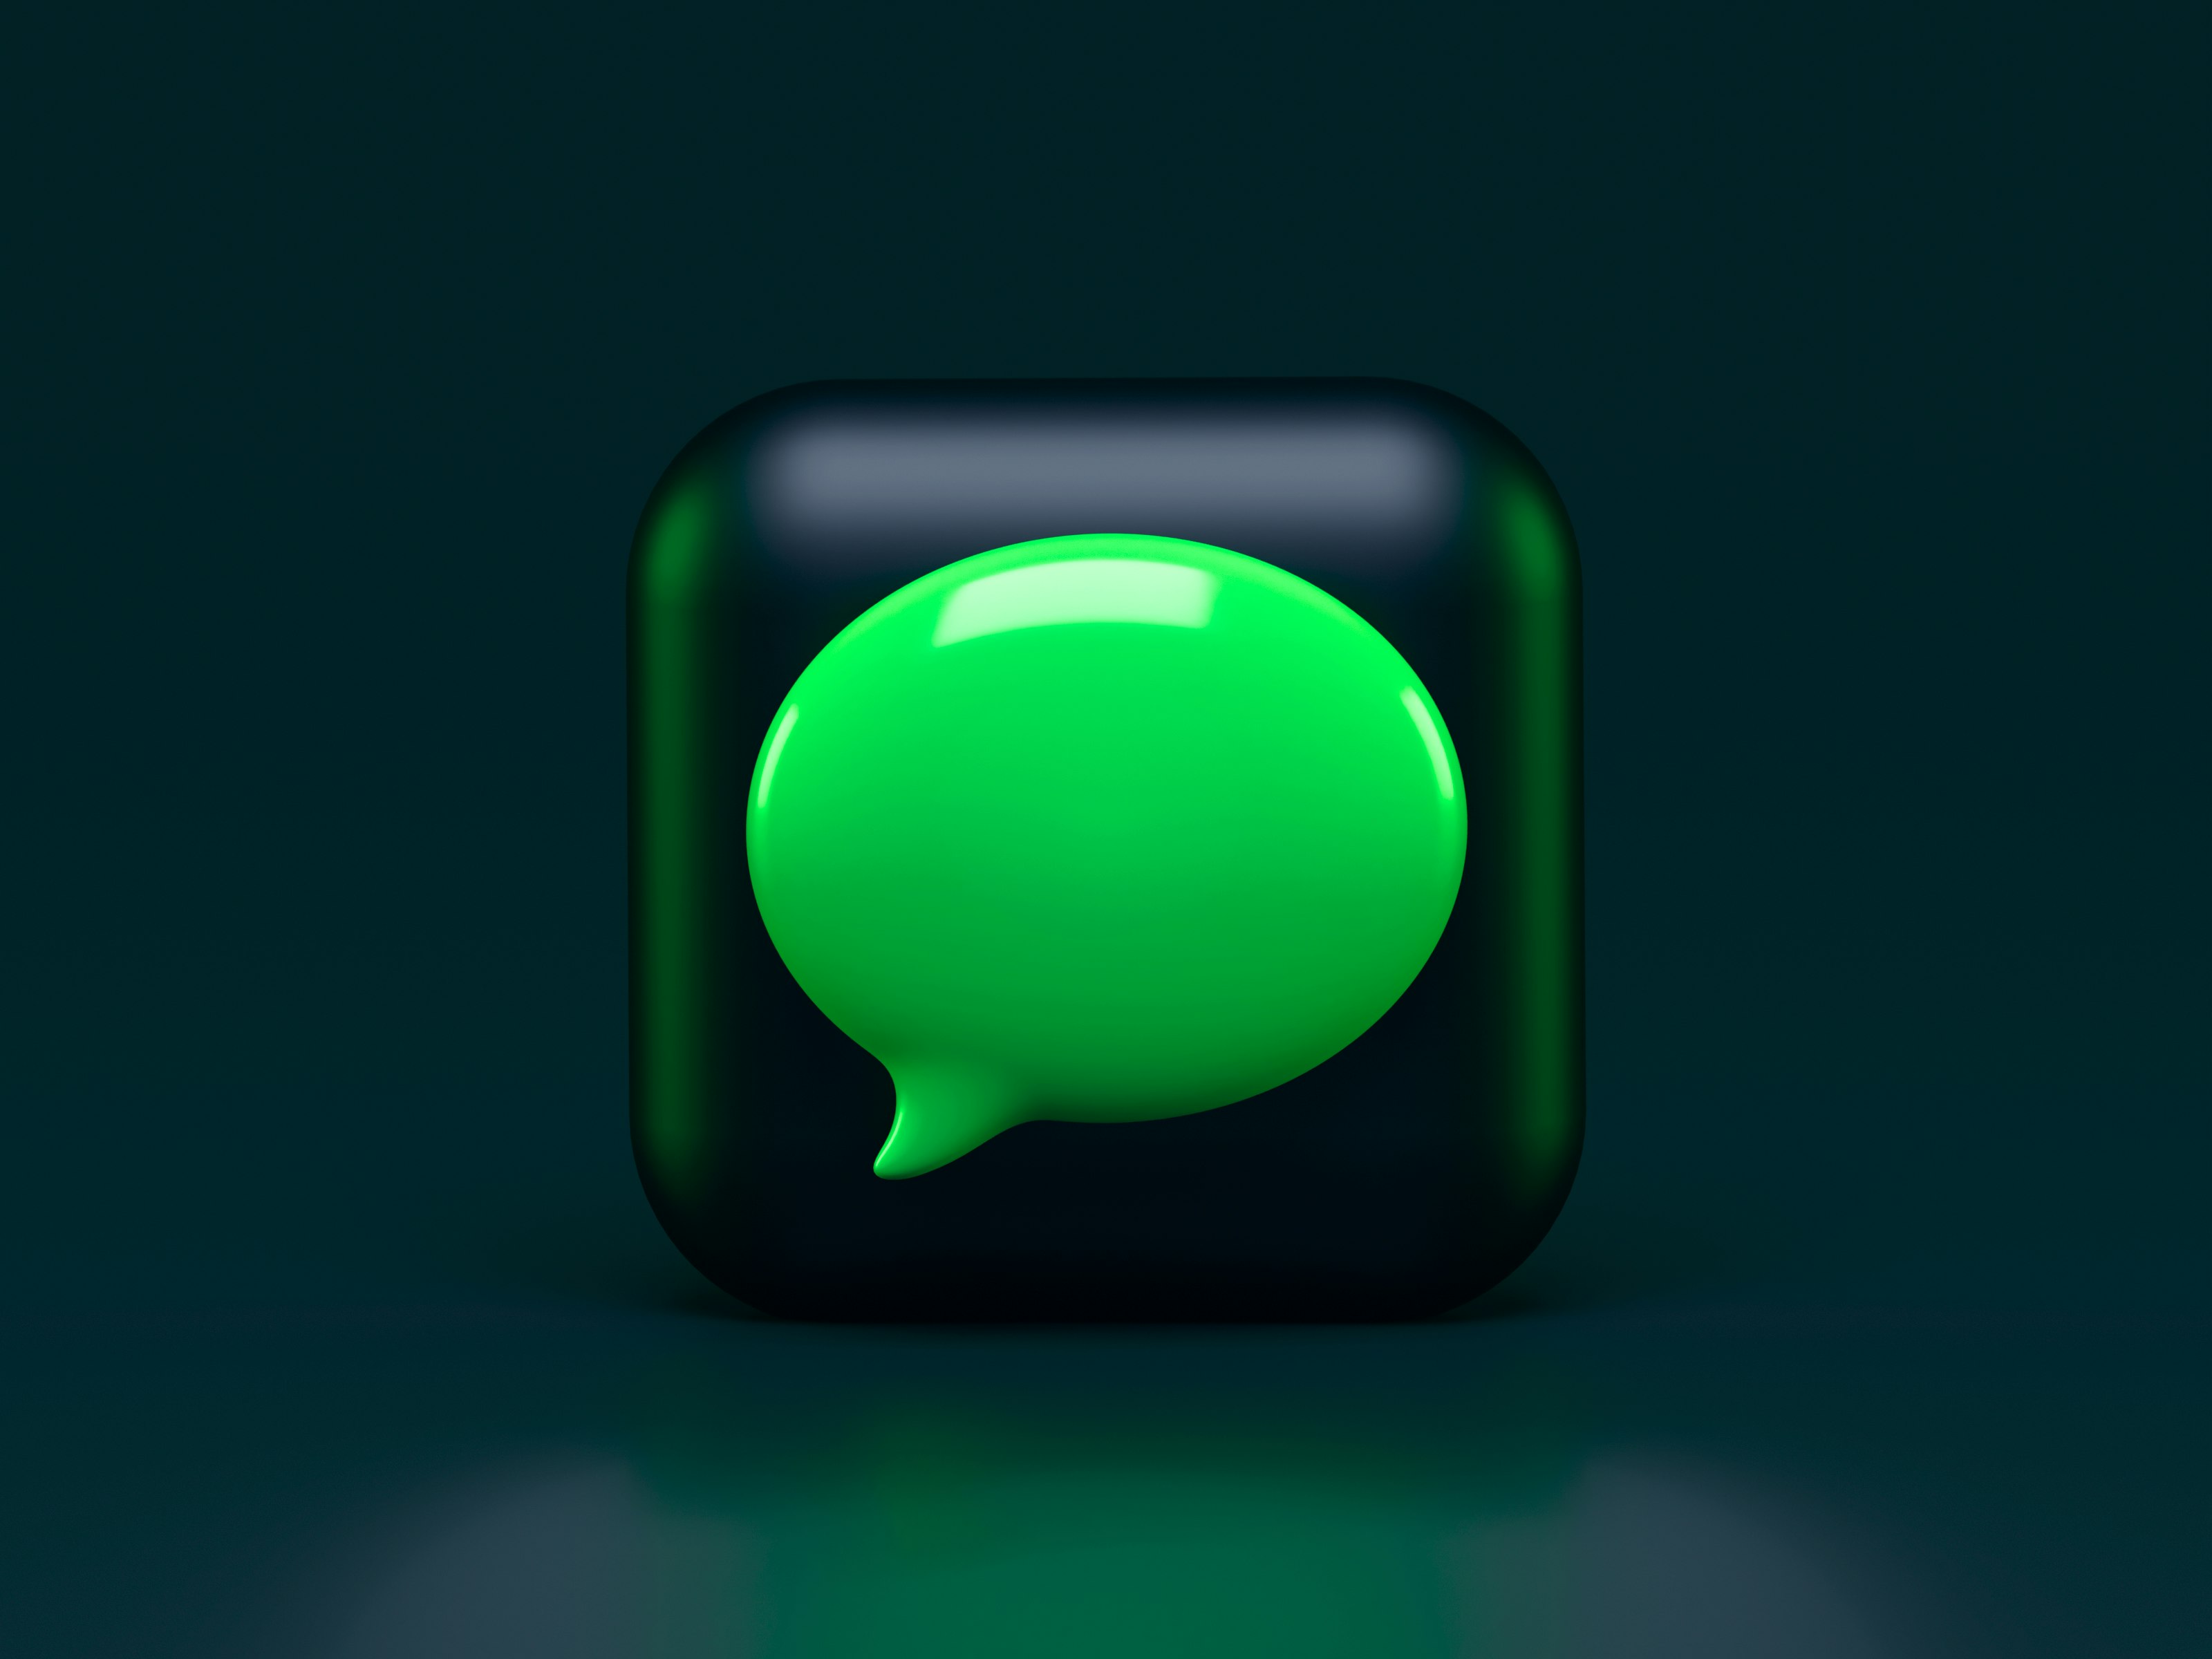 A green chat symbol on a black background.